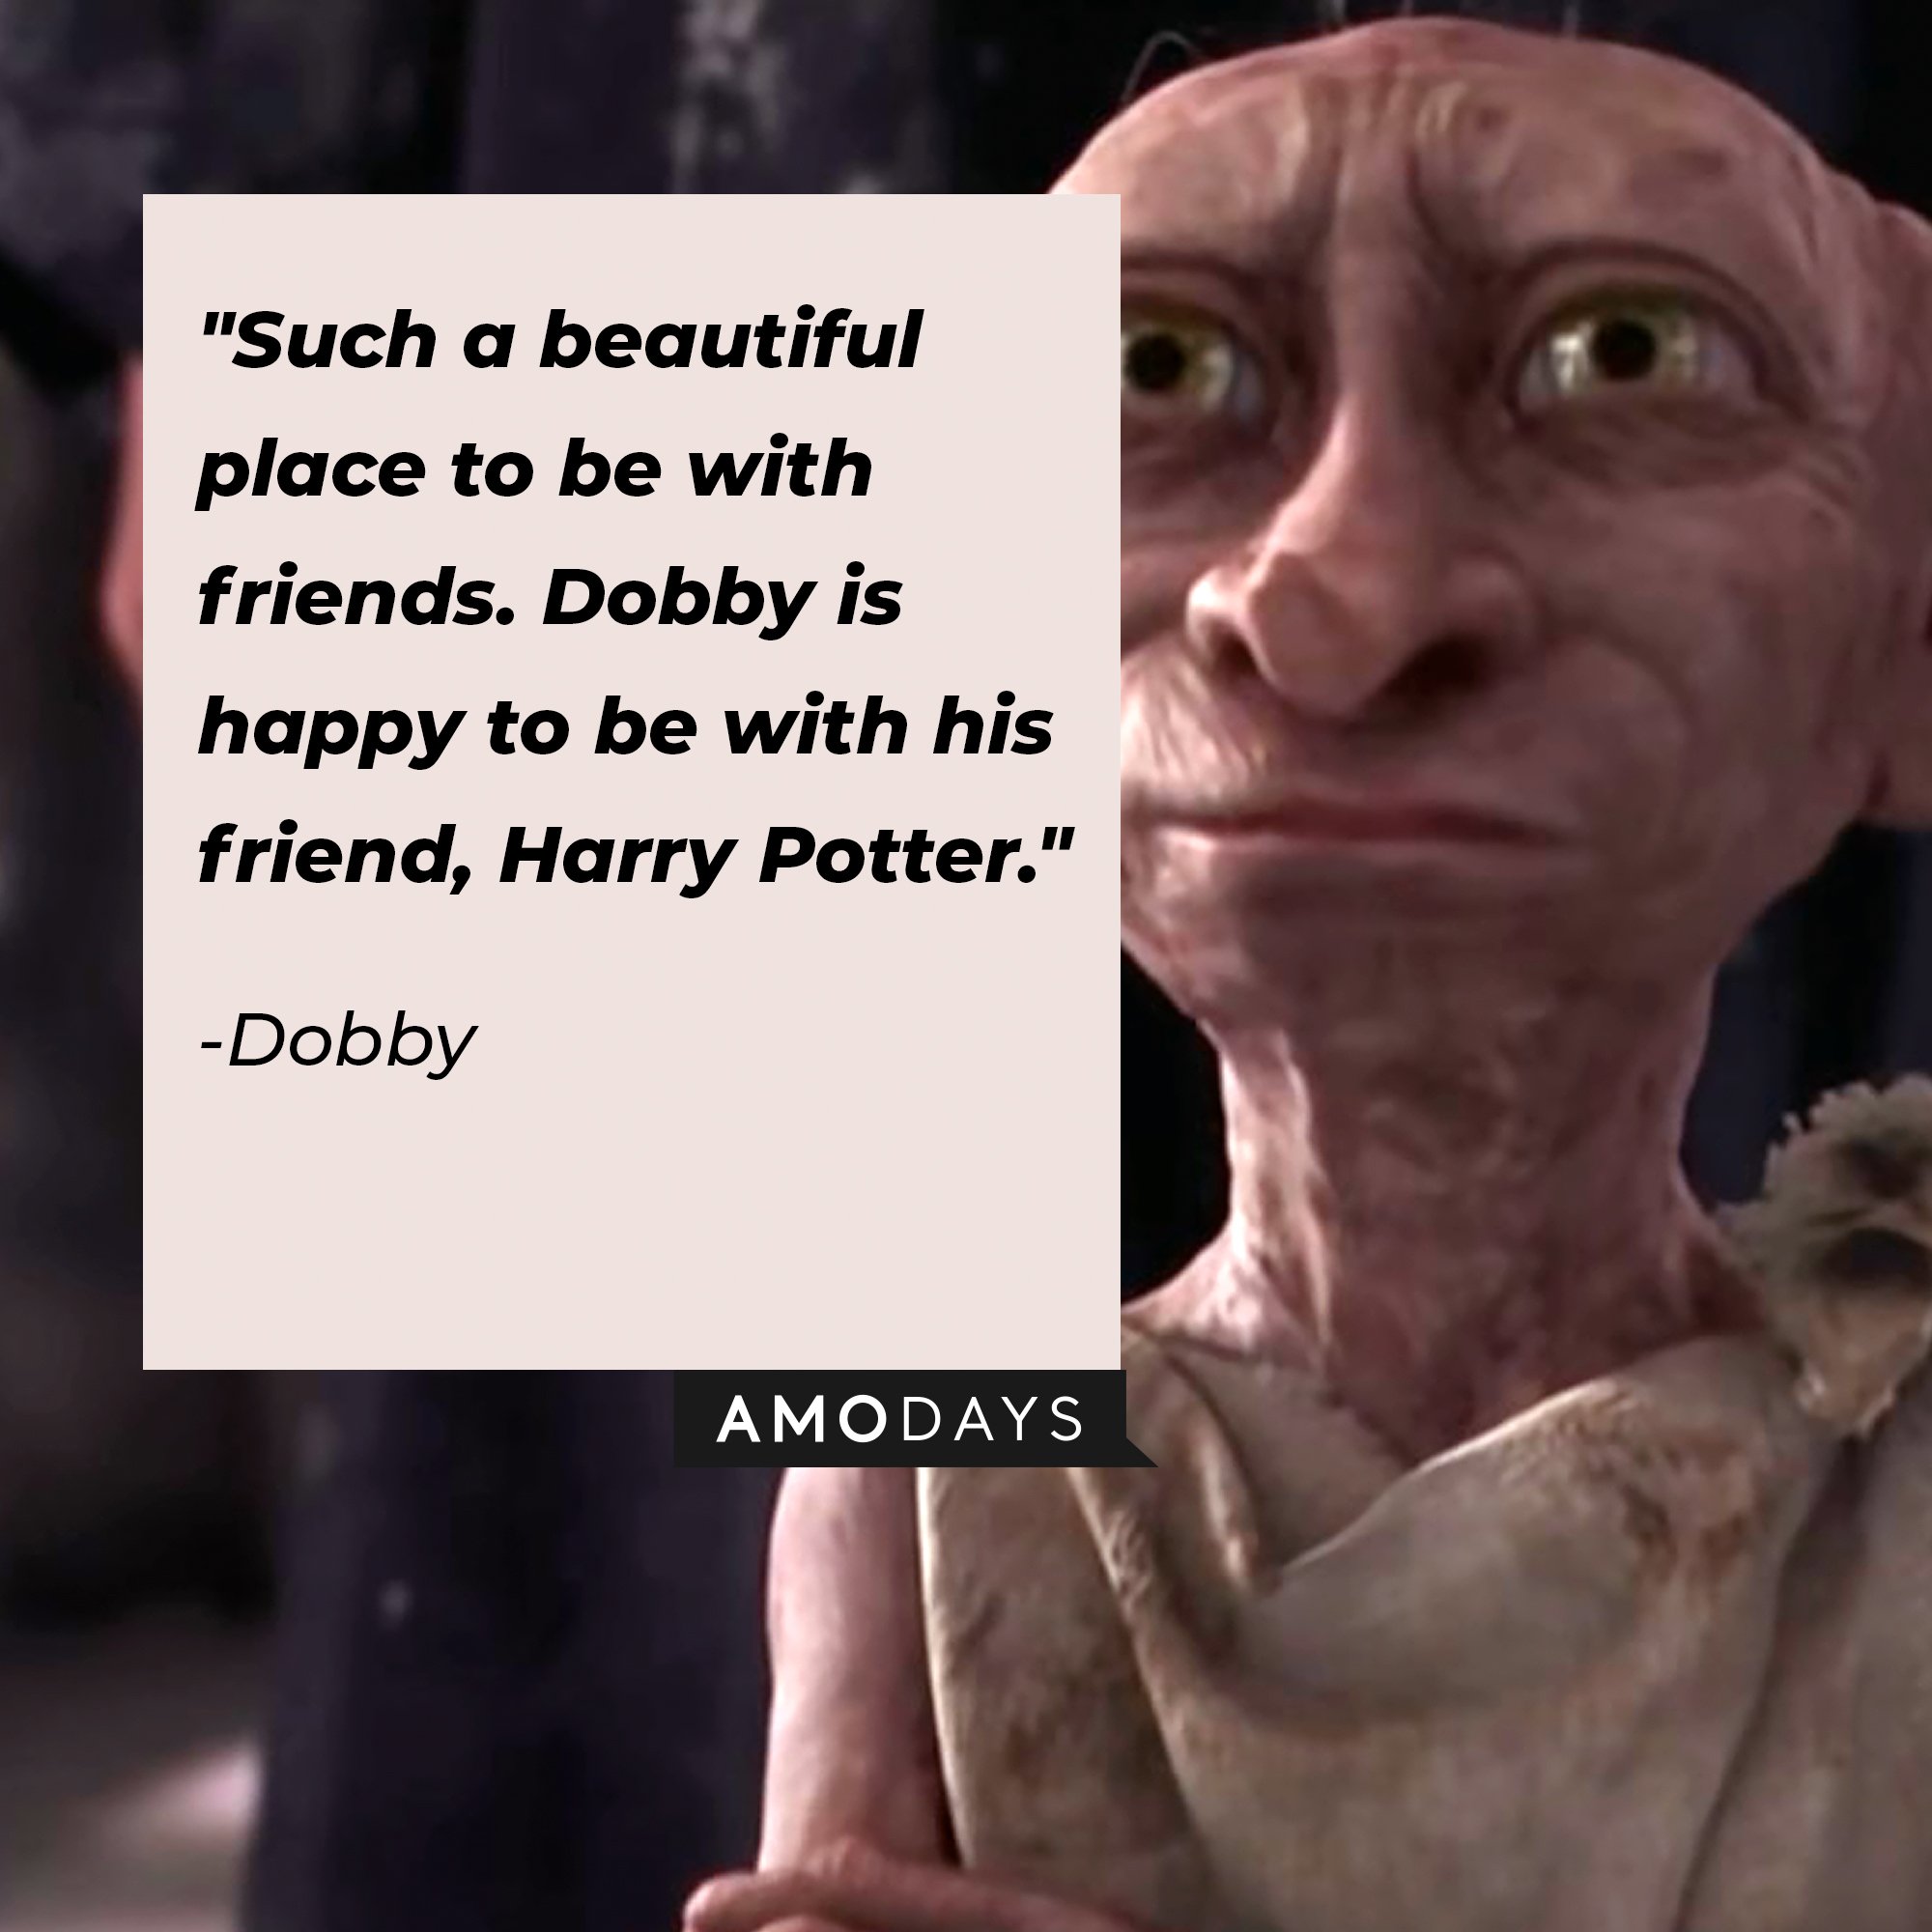 Dobby’s quote: "Such a beautiful place to be with friends. Dobby is happy to be with his friend, Harry Potter." | Image: AmoDays